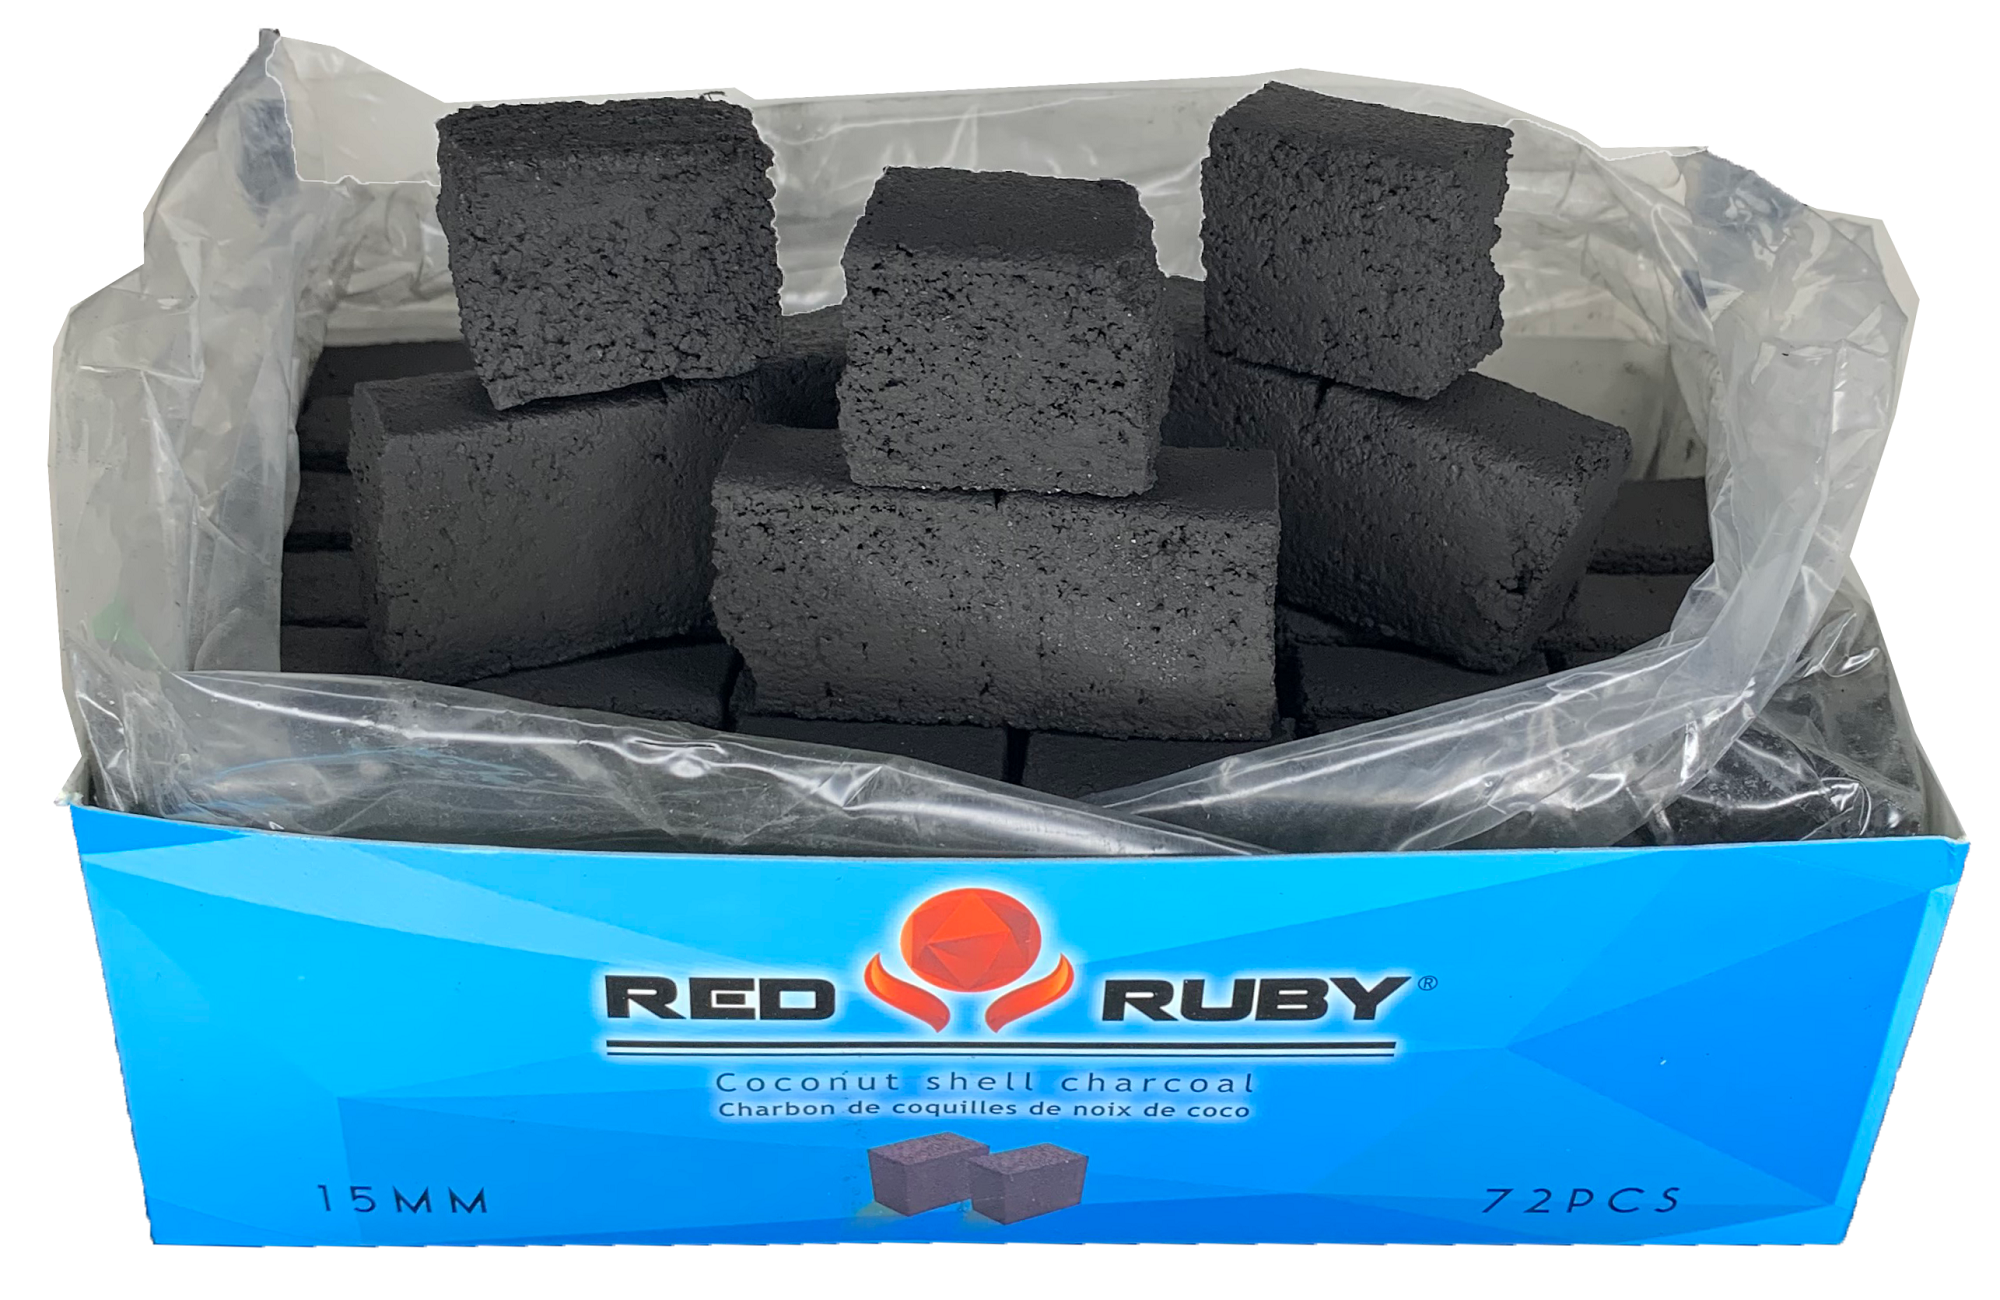 Red Ruby Coco Flat Charcoal 72pcs-15mm